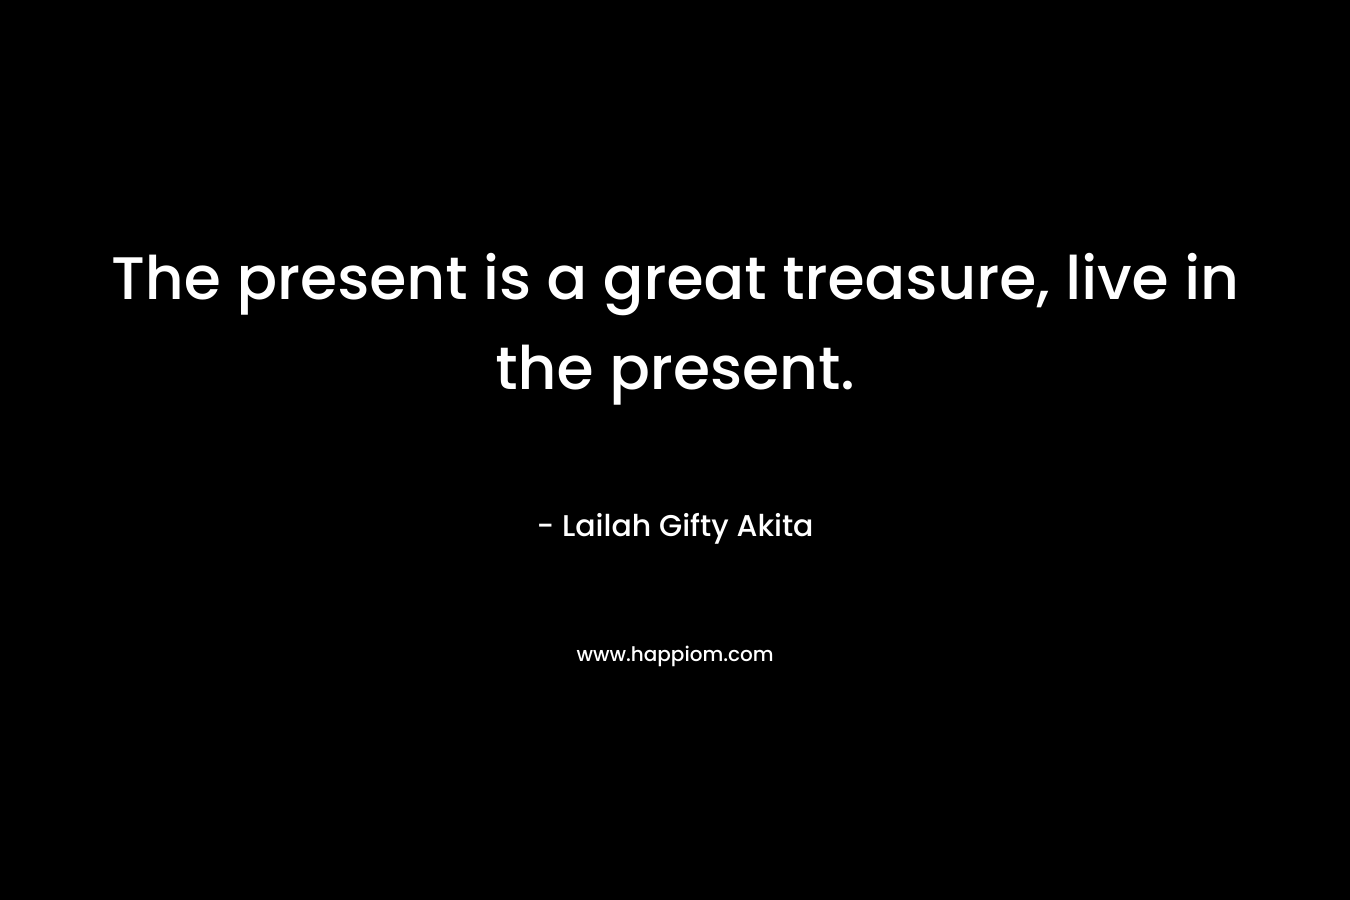 The present is a great treasure, live in the present. – Lailah Gifty Akita